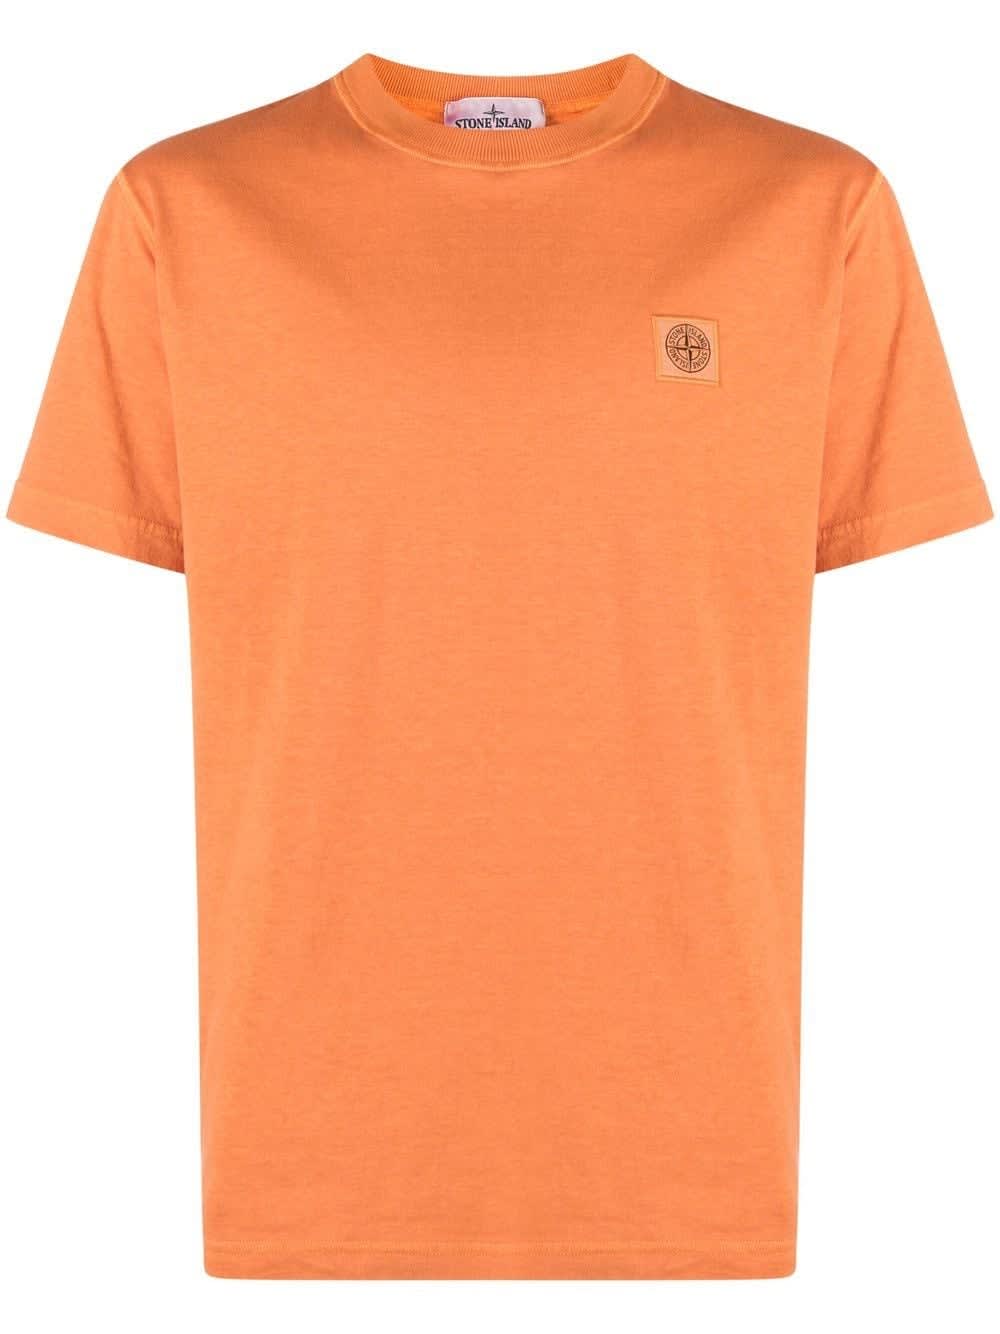 STONE ISLAND SIENNA COTTON T-SHIRT WITH FIXED EFFECT